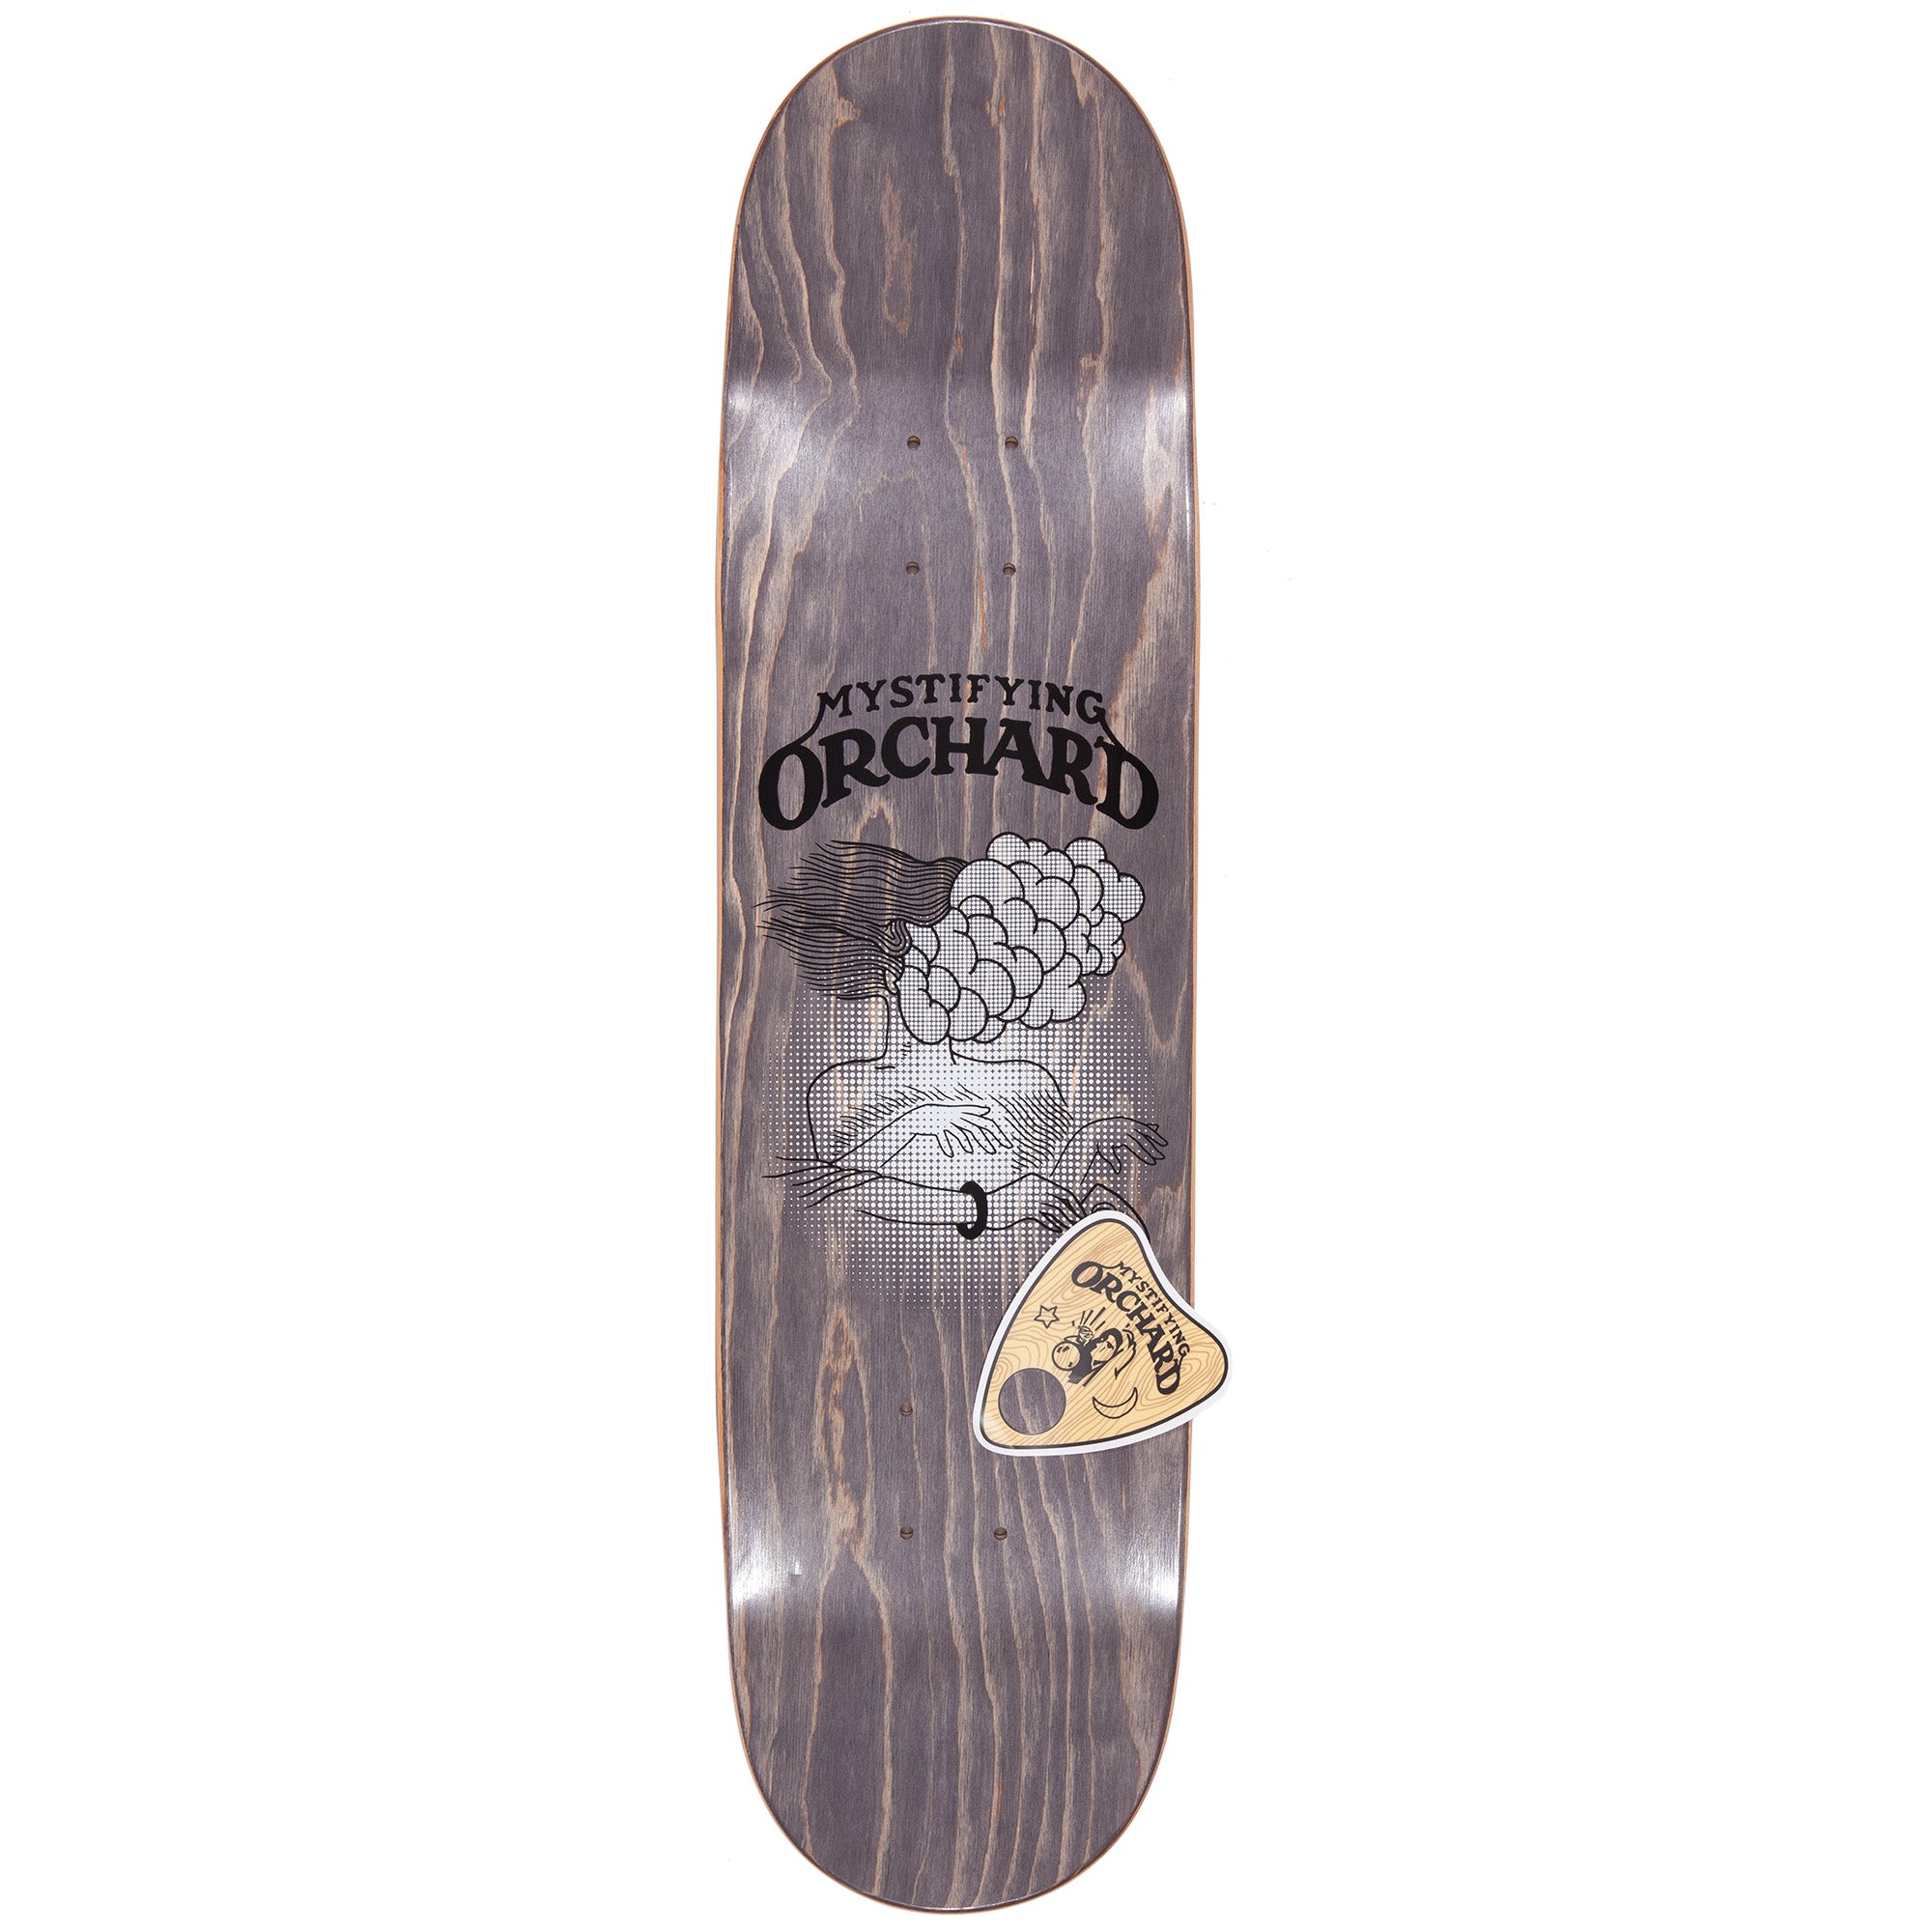 Orchard Mystifying Deck 8.25" Assorted Stains